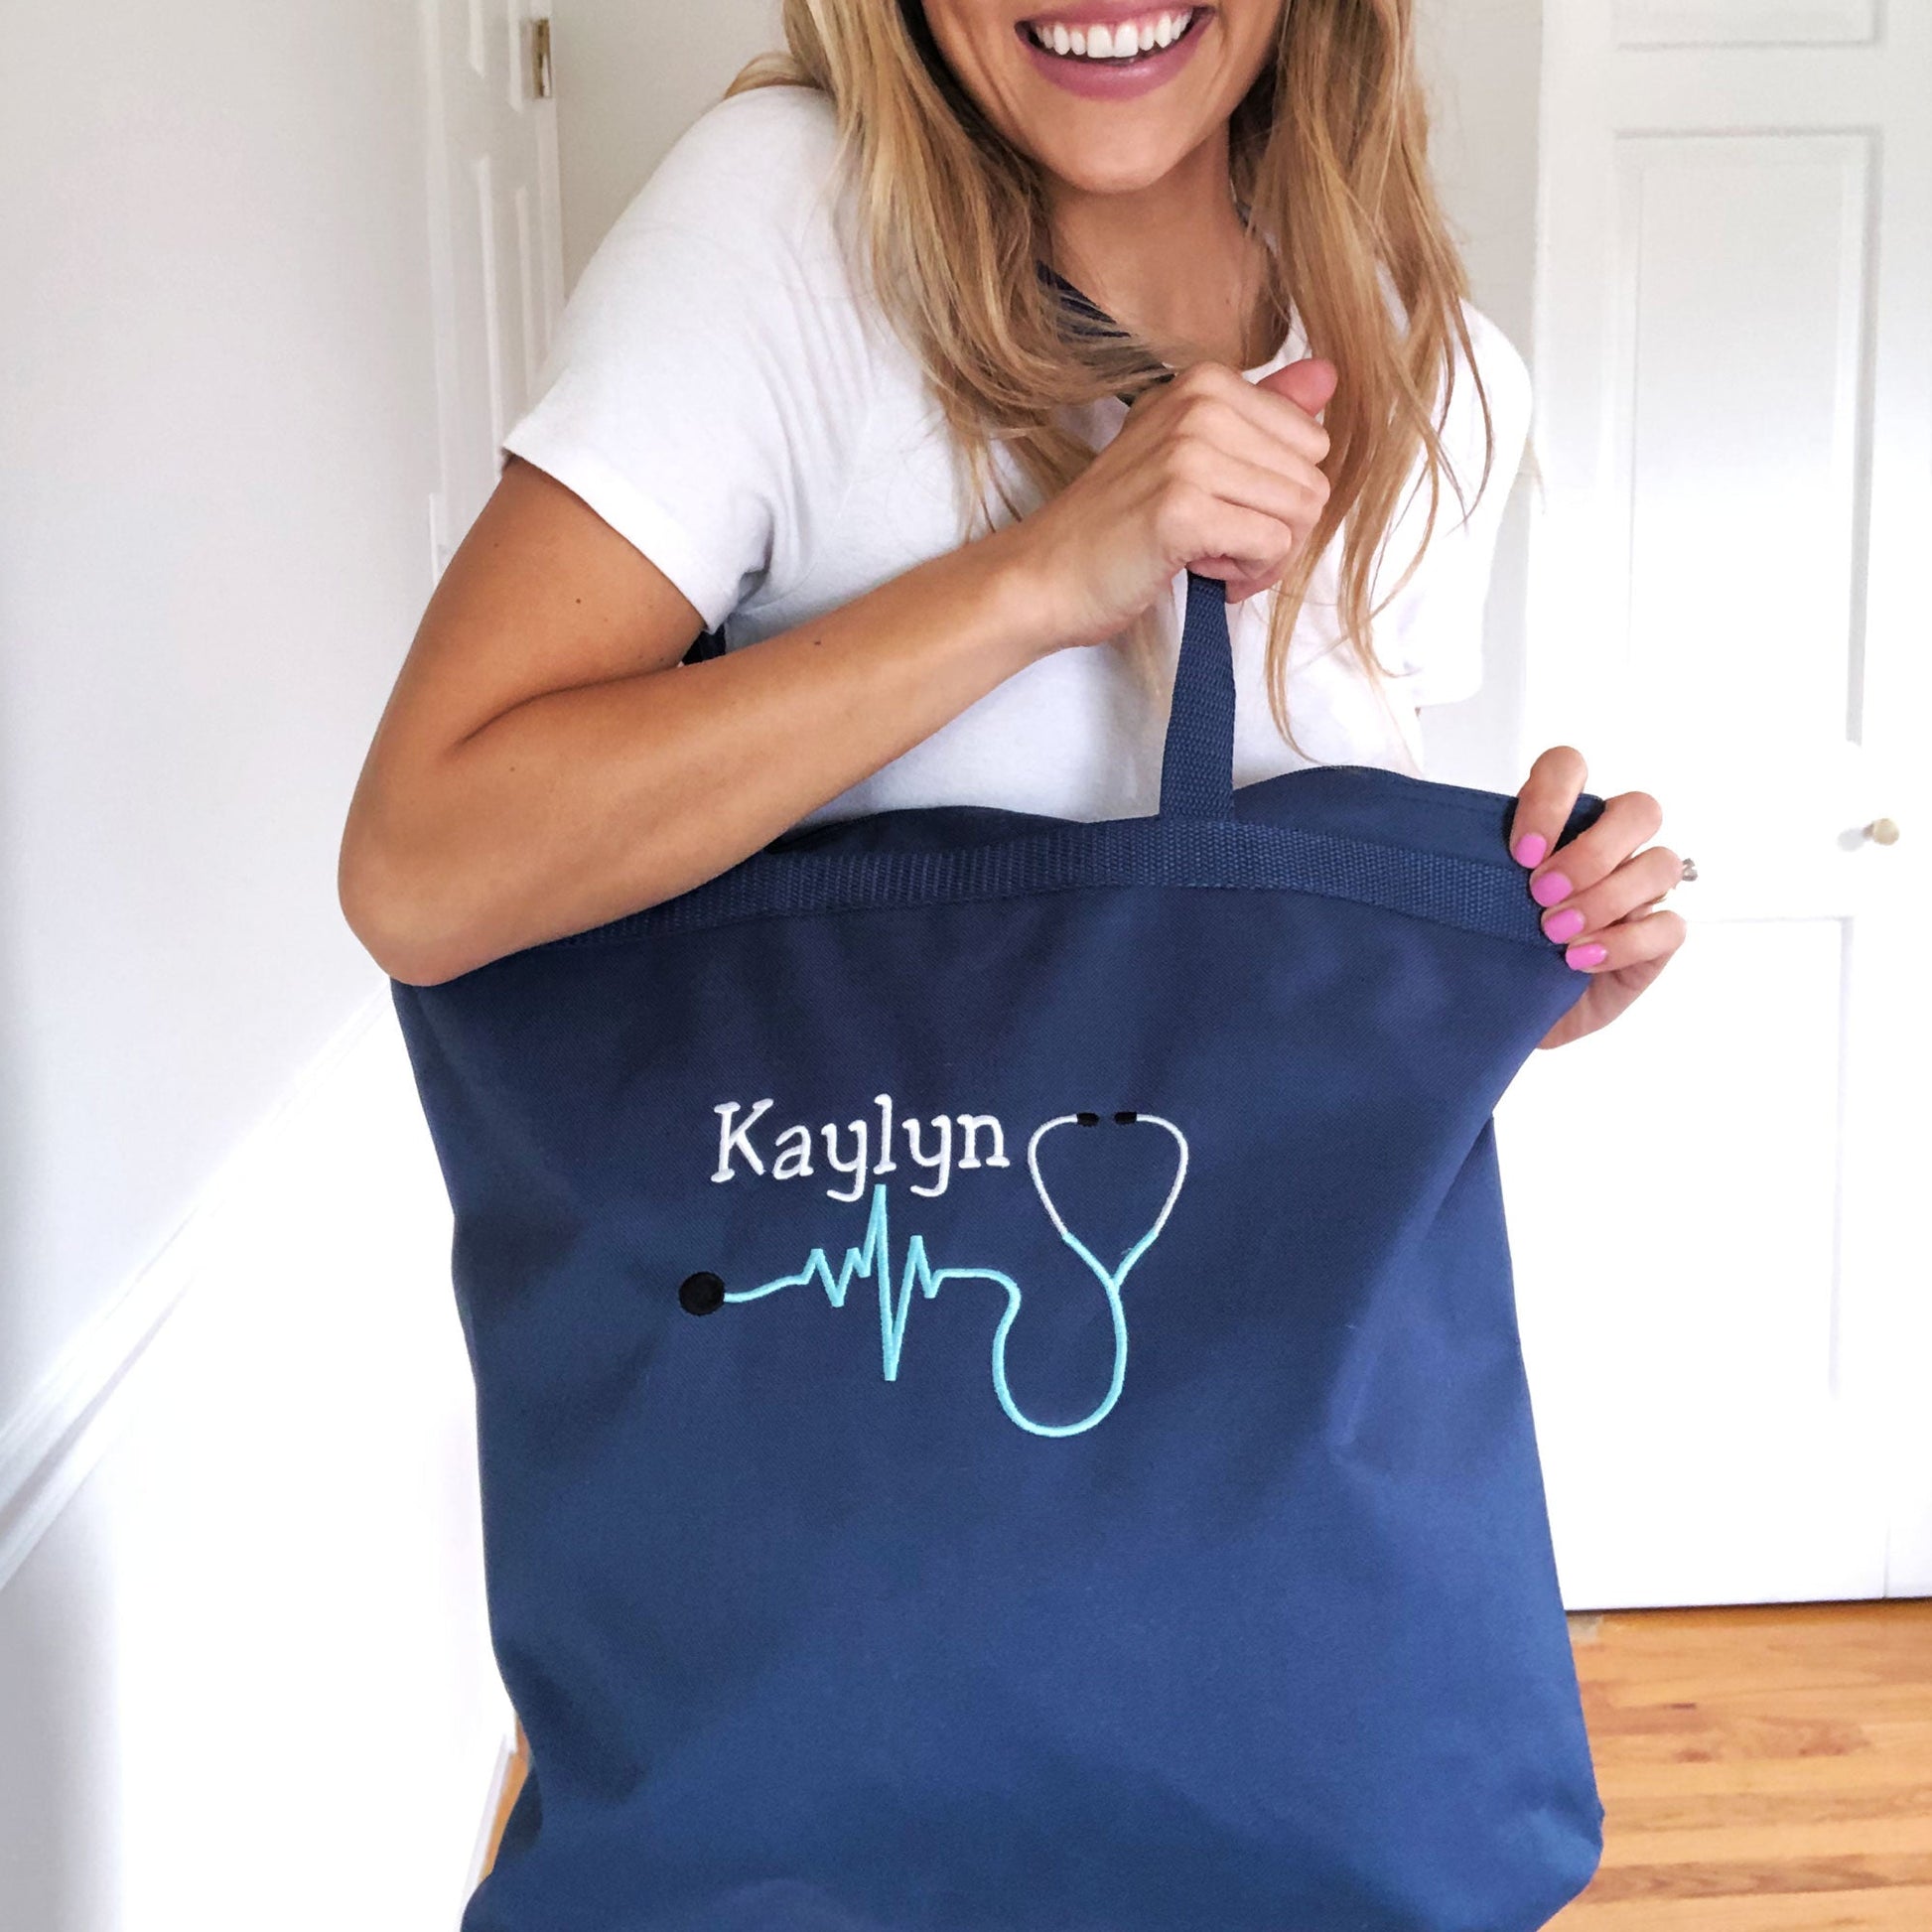 woman holding navy bag with name and stethoscope embroidered